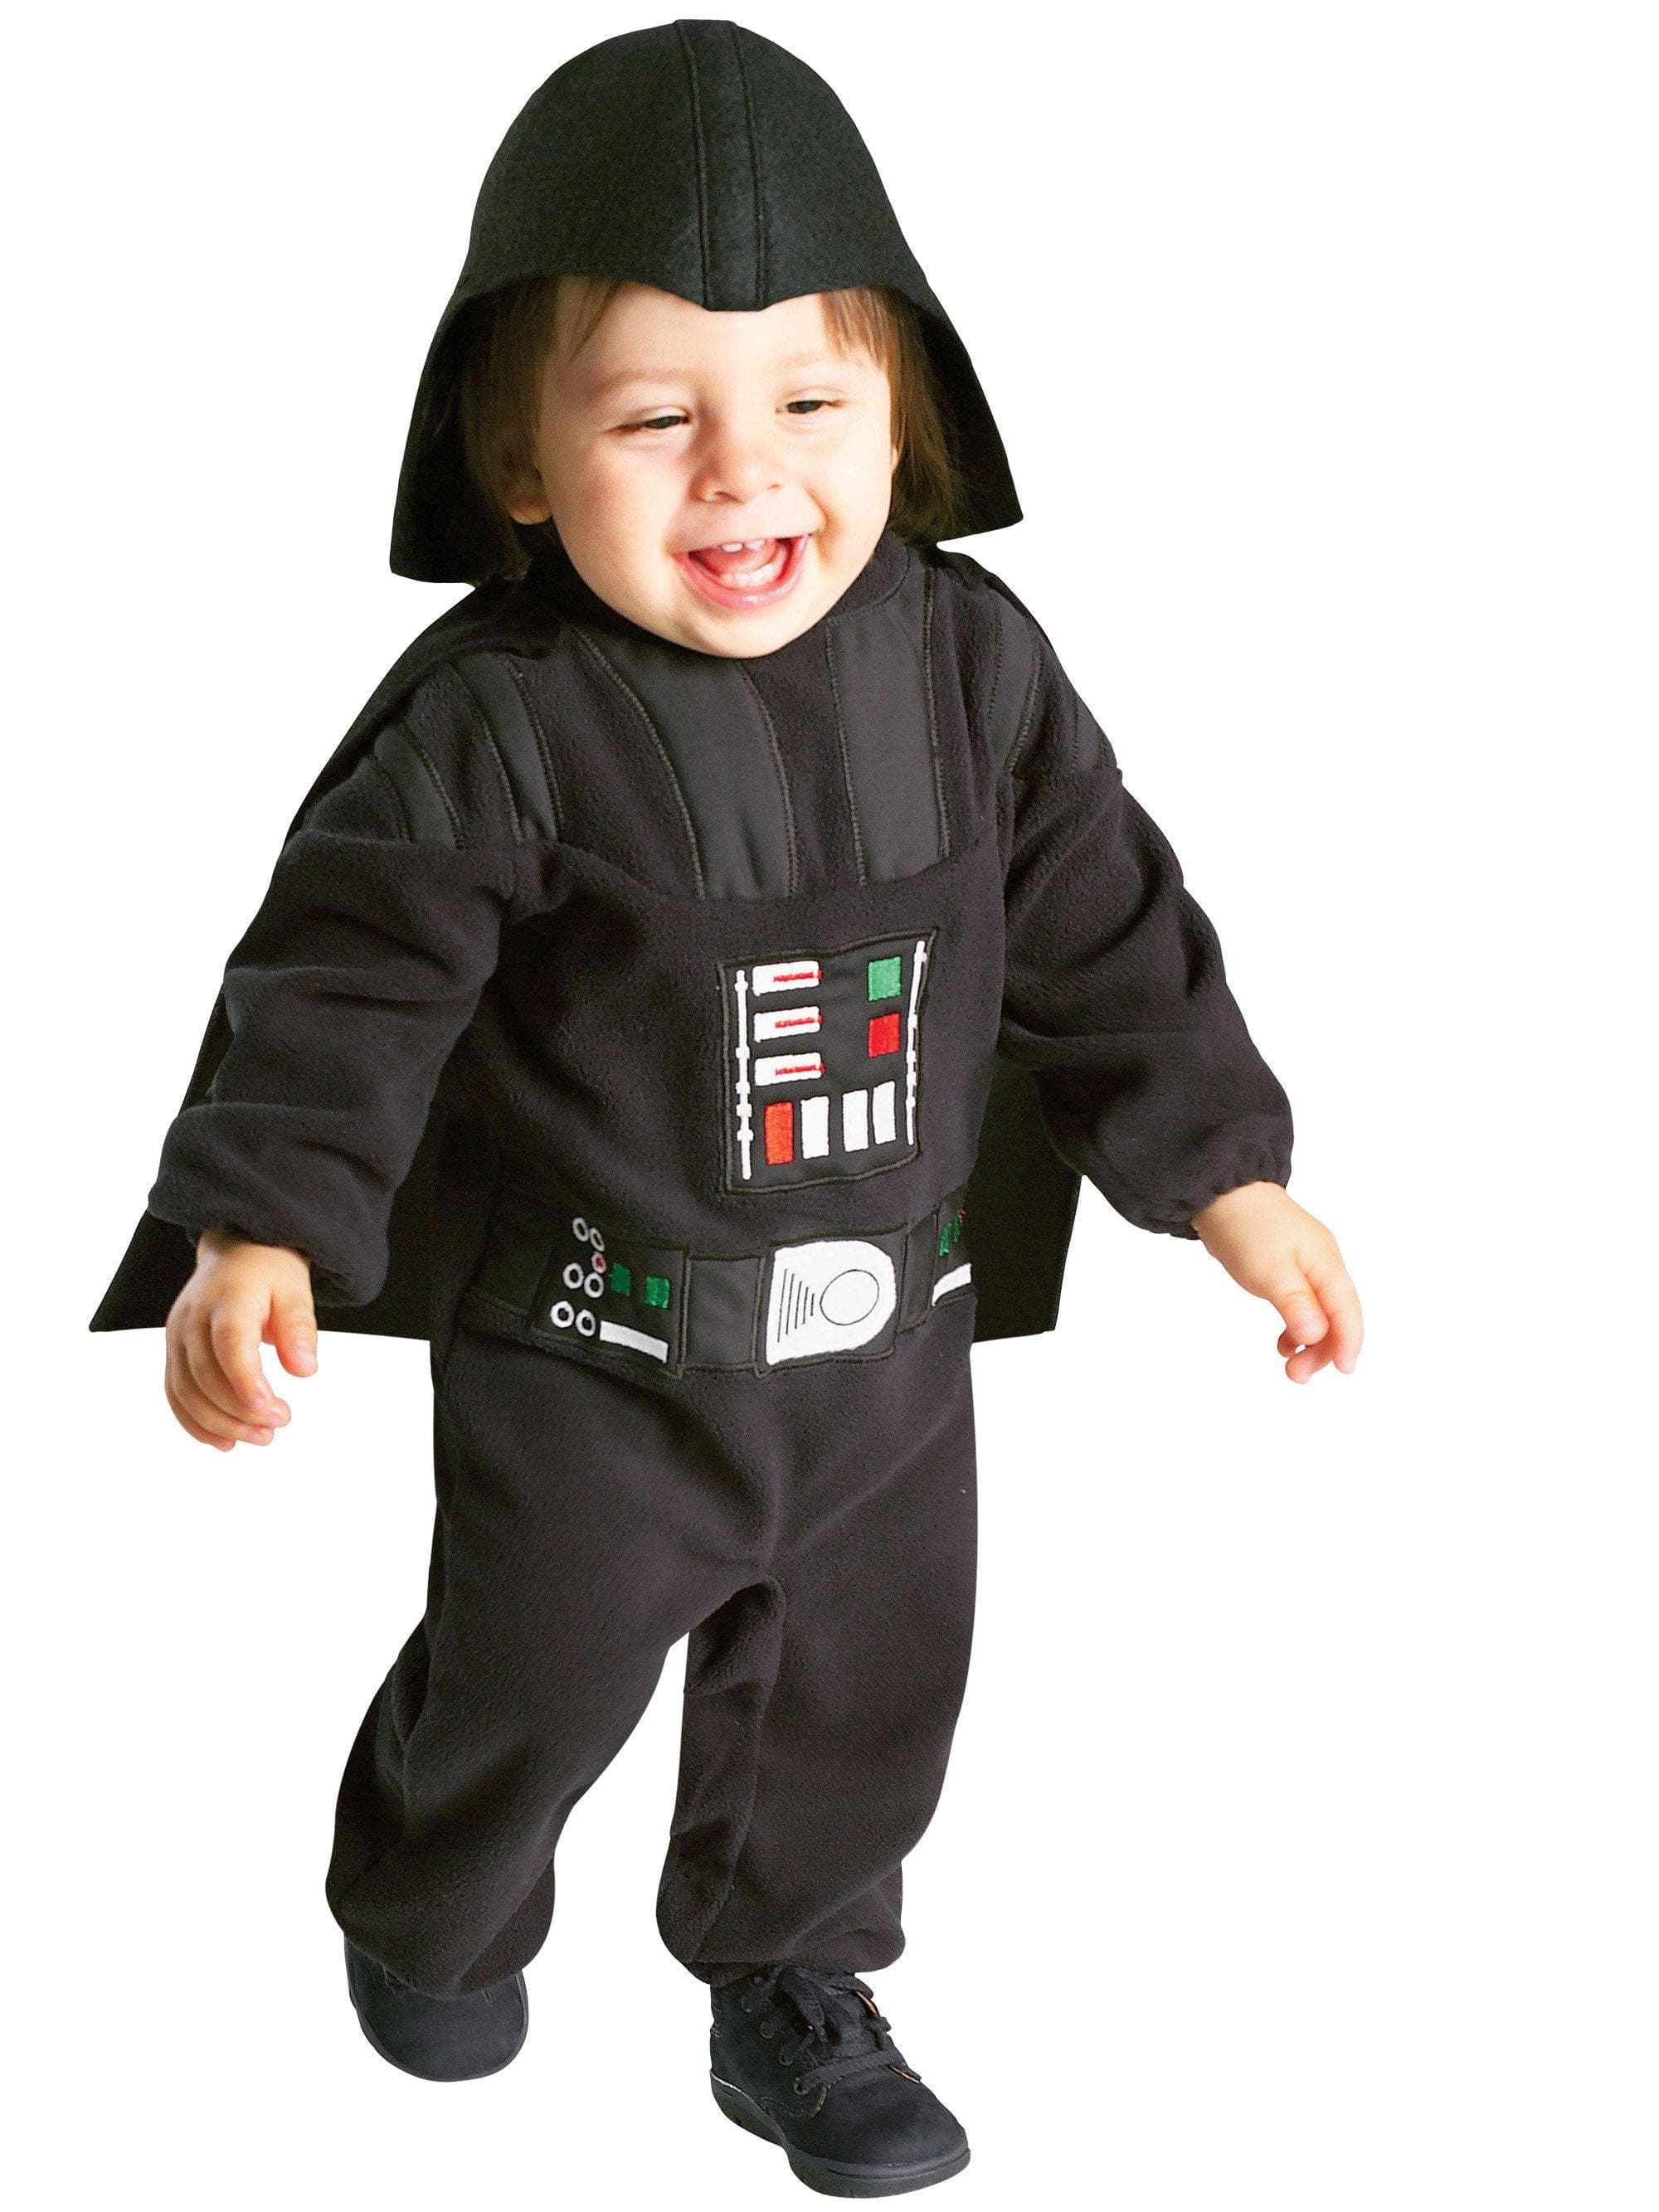 Baby/Toddler Classic Star Wars Darth Vader Costume - costumes.com